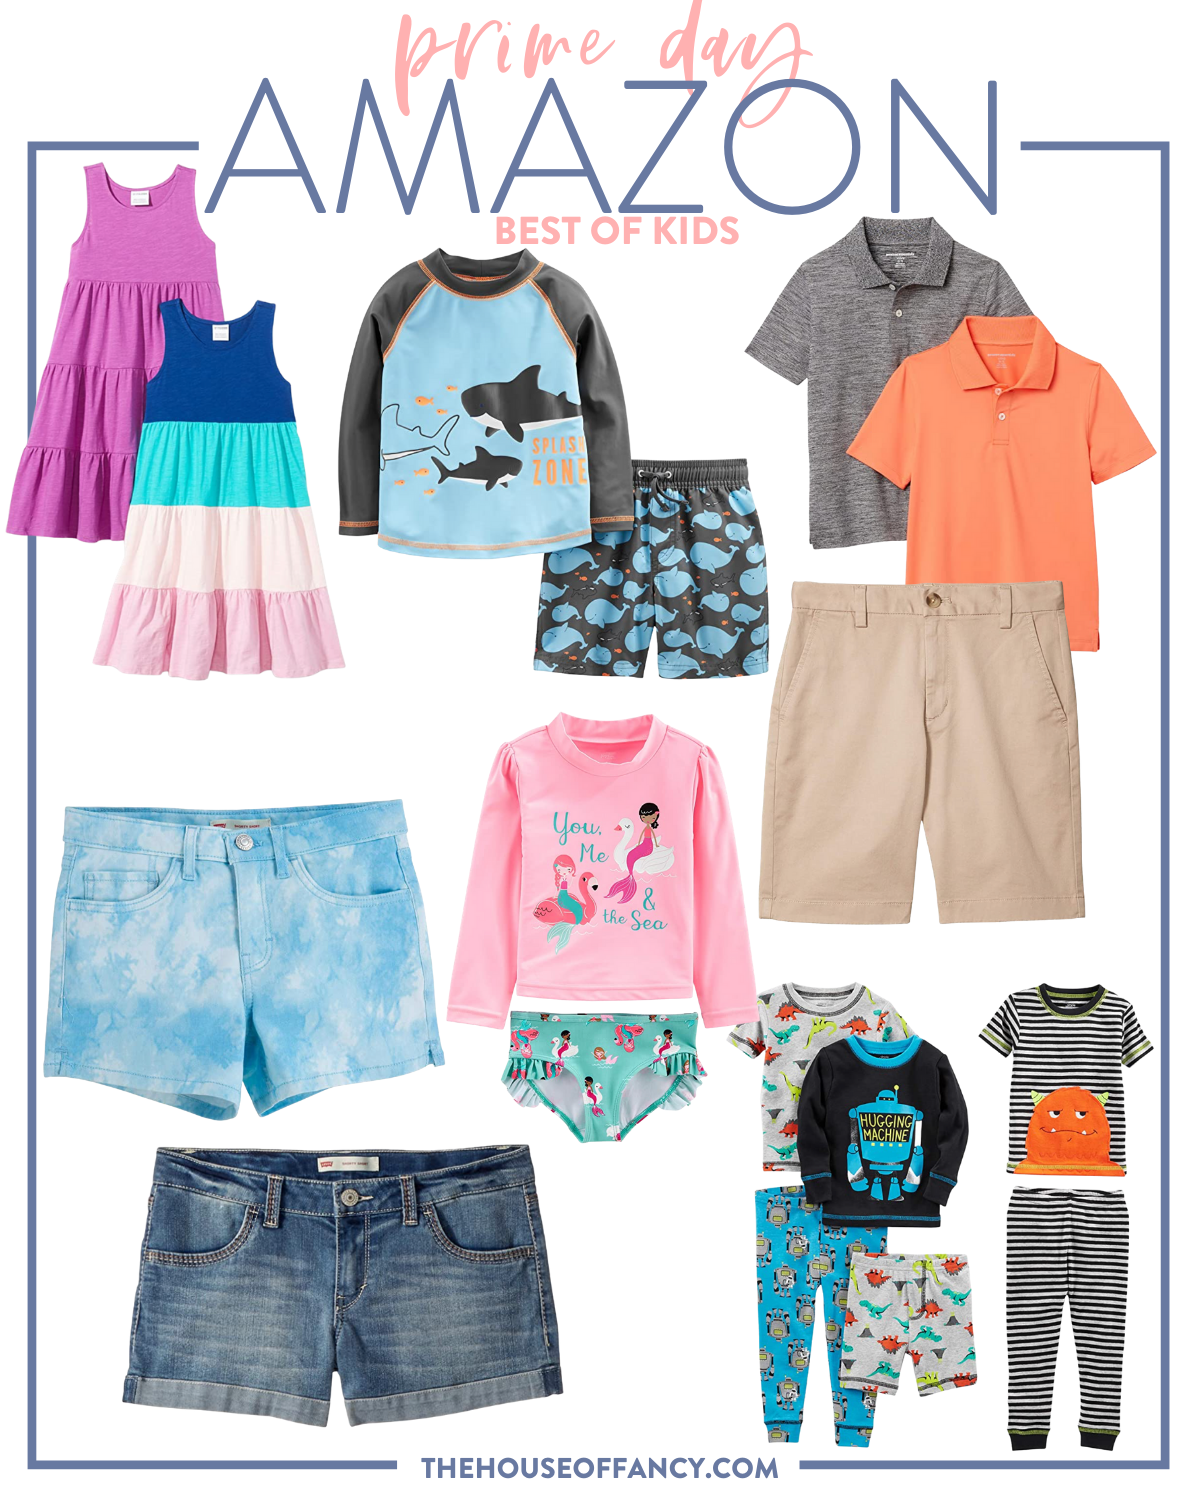 Amazon Prime Day by popular Houston life and style blog, The House of Fancy: collage image of girls tiered midi dresses, blue and white tie dye shorts, orange and grey polo shirts, tan shorts, denim shorts, rash guard swimsuit set, monster pajama set, robot pajama set, and dinosaur pajama set. 